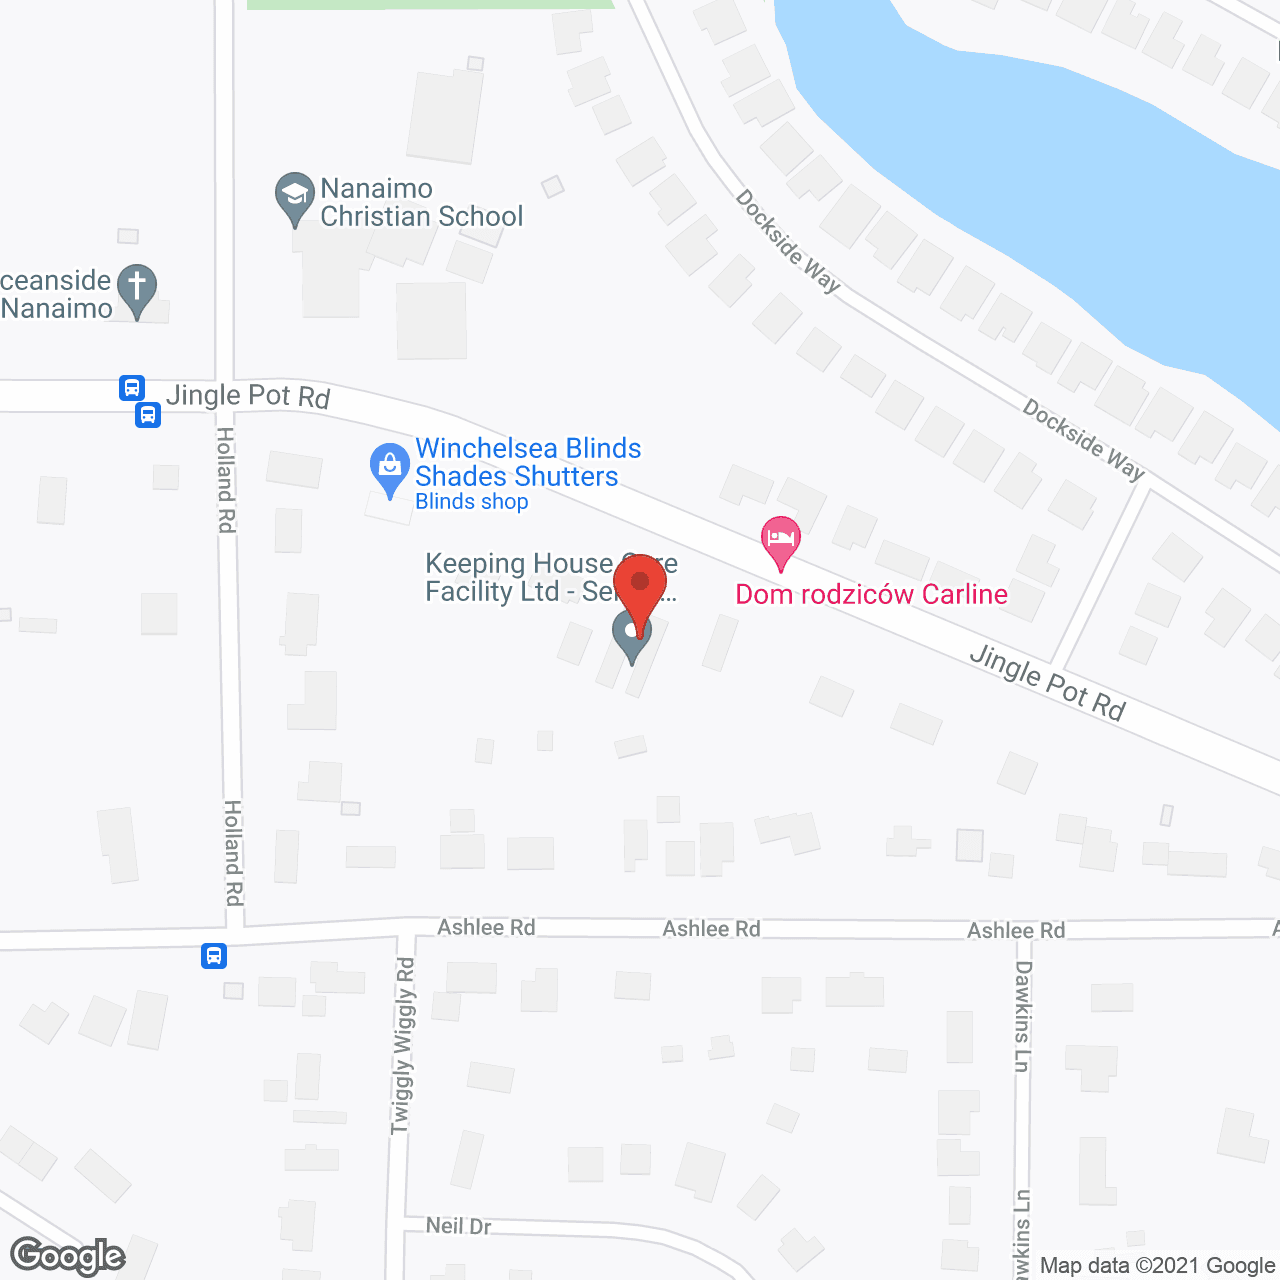 Keeping House in google map